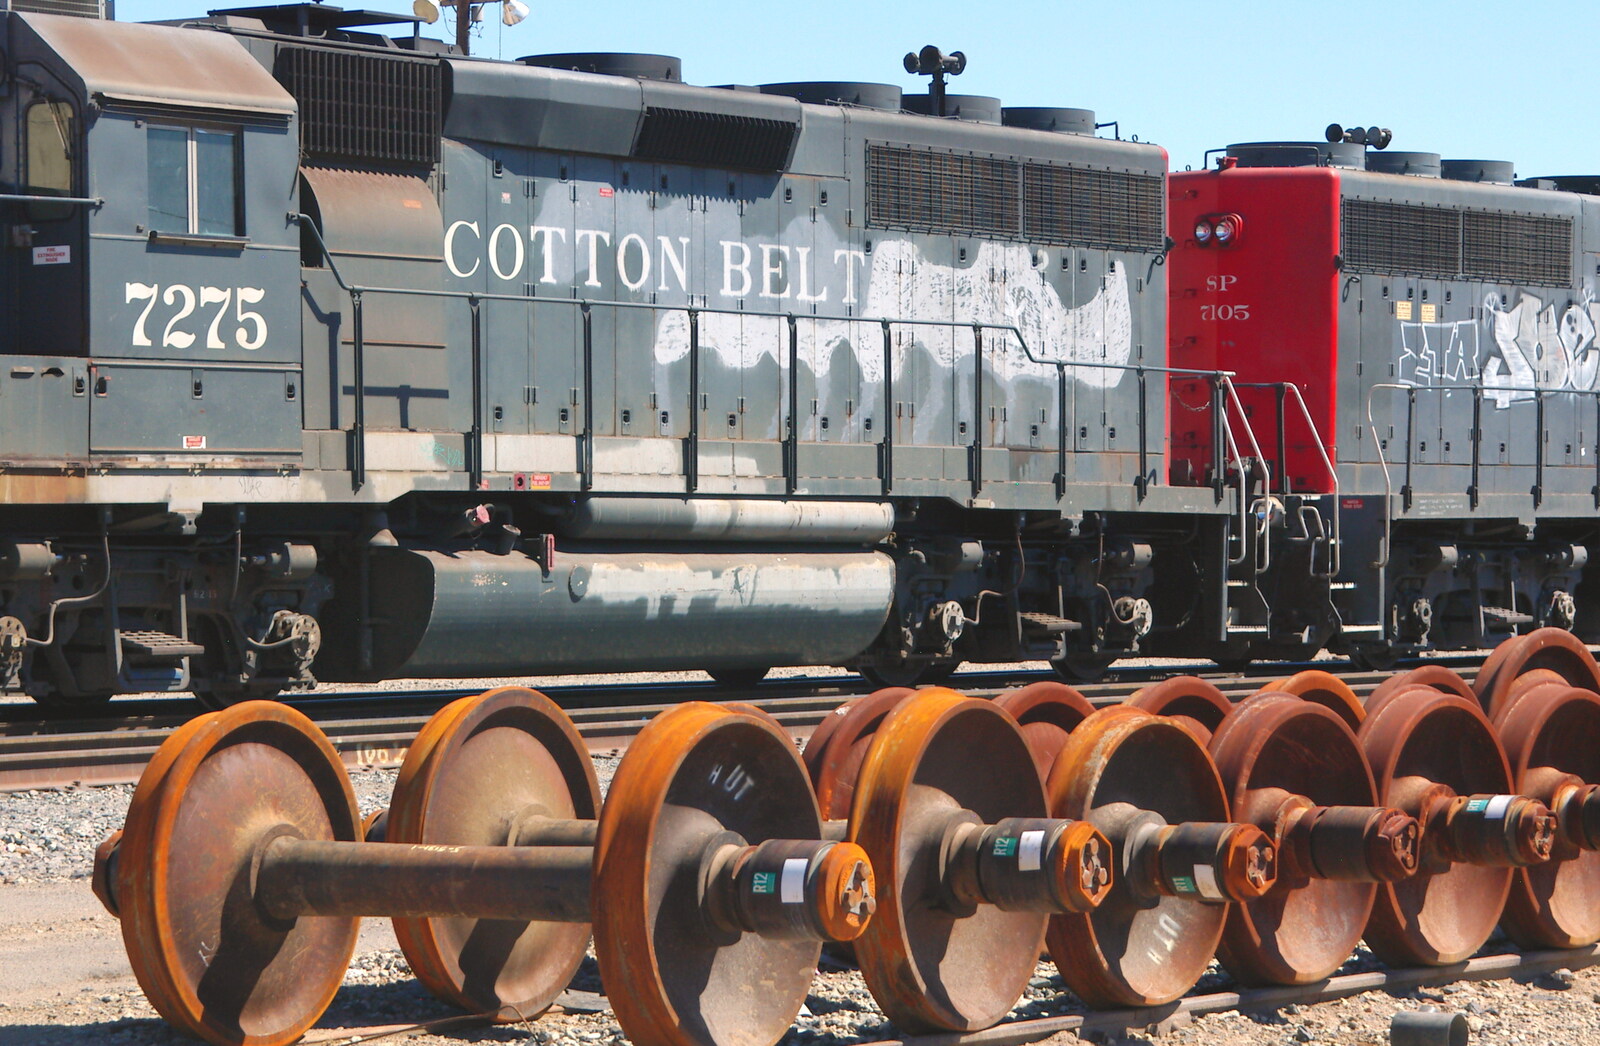 Rusty wheels and the loco 'Cotton Belt' from California Desert: El Centro, Imperial Valley, California, US - 24th September 2005